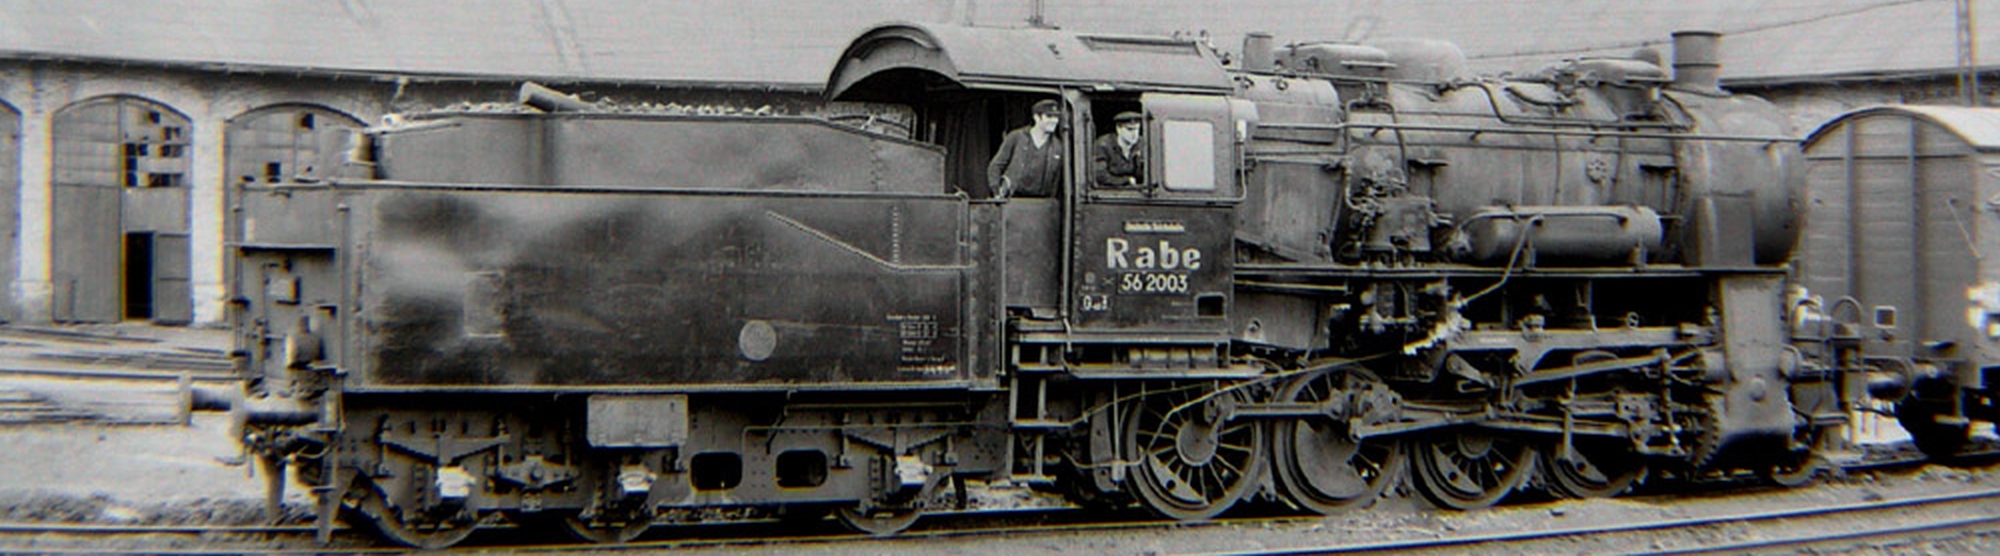 56 2003 in March 1967 in Sangerhausen with the name written on it for the shunting radio